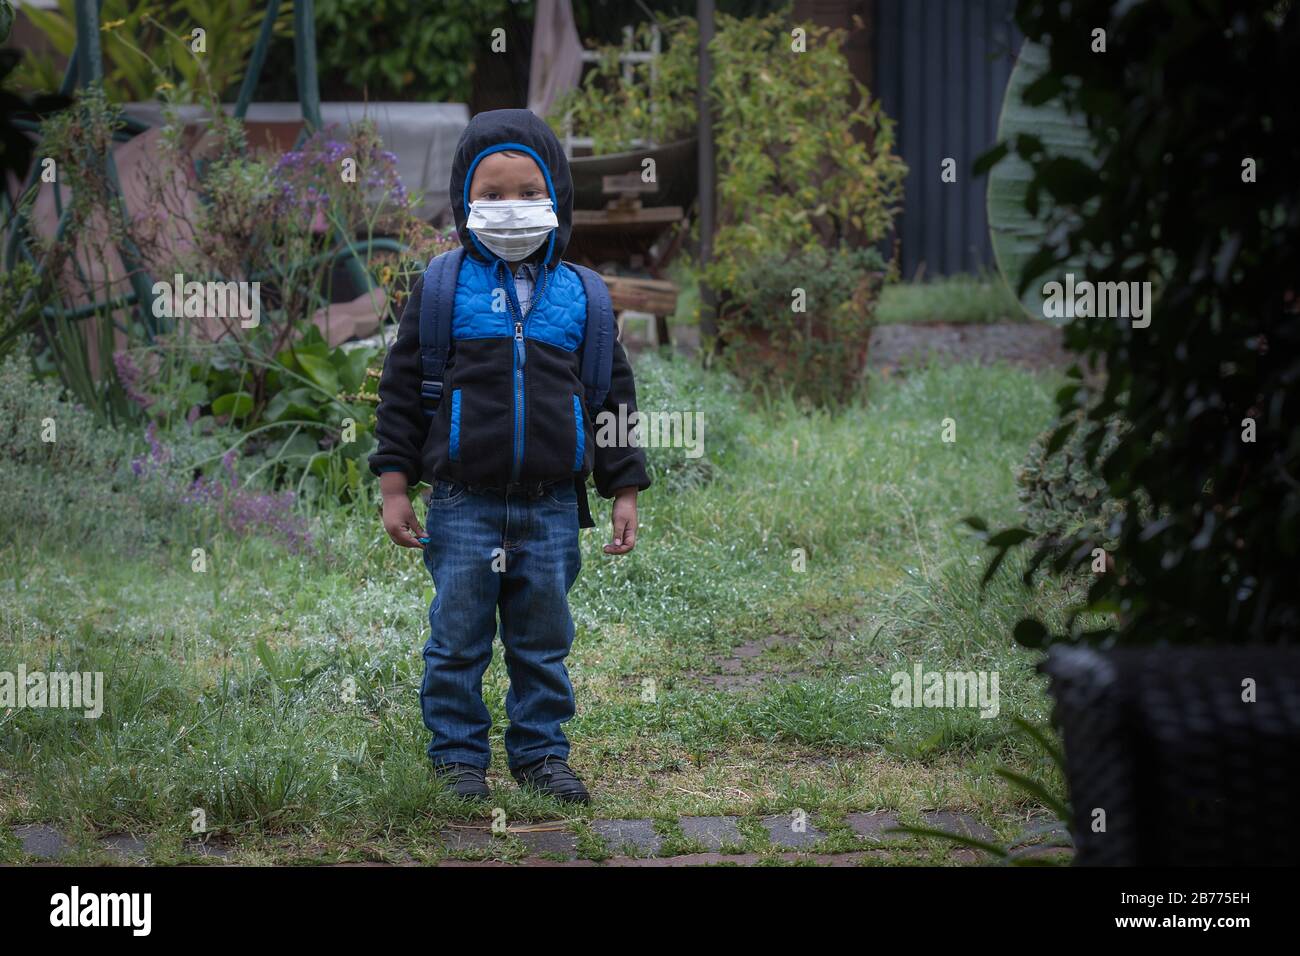 A young boy wearing a backpack, face mask, hoodie jacket, and rain boots, standing outdoors while its raining. Stock Photo